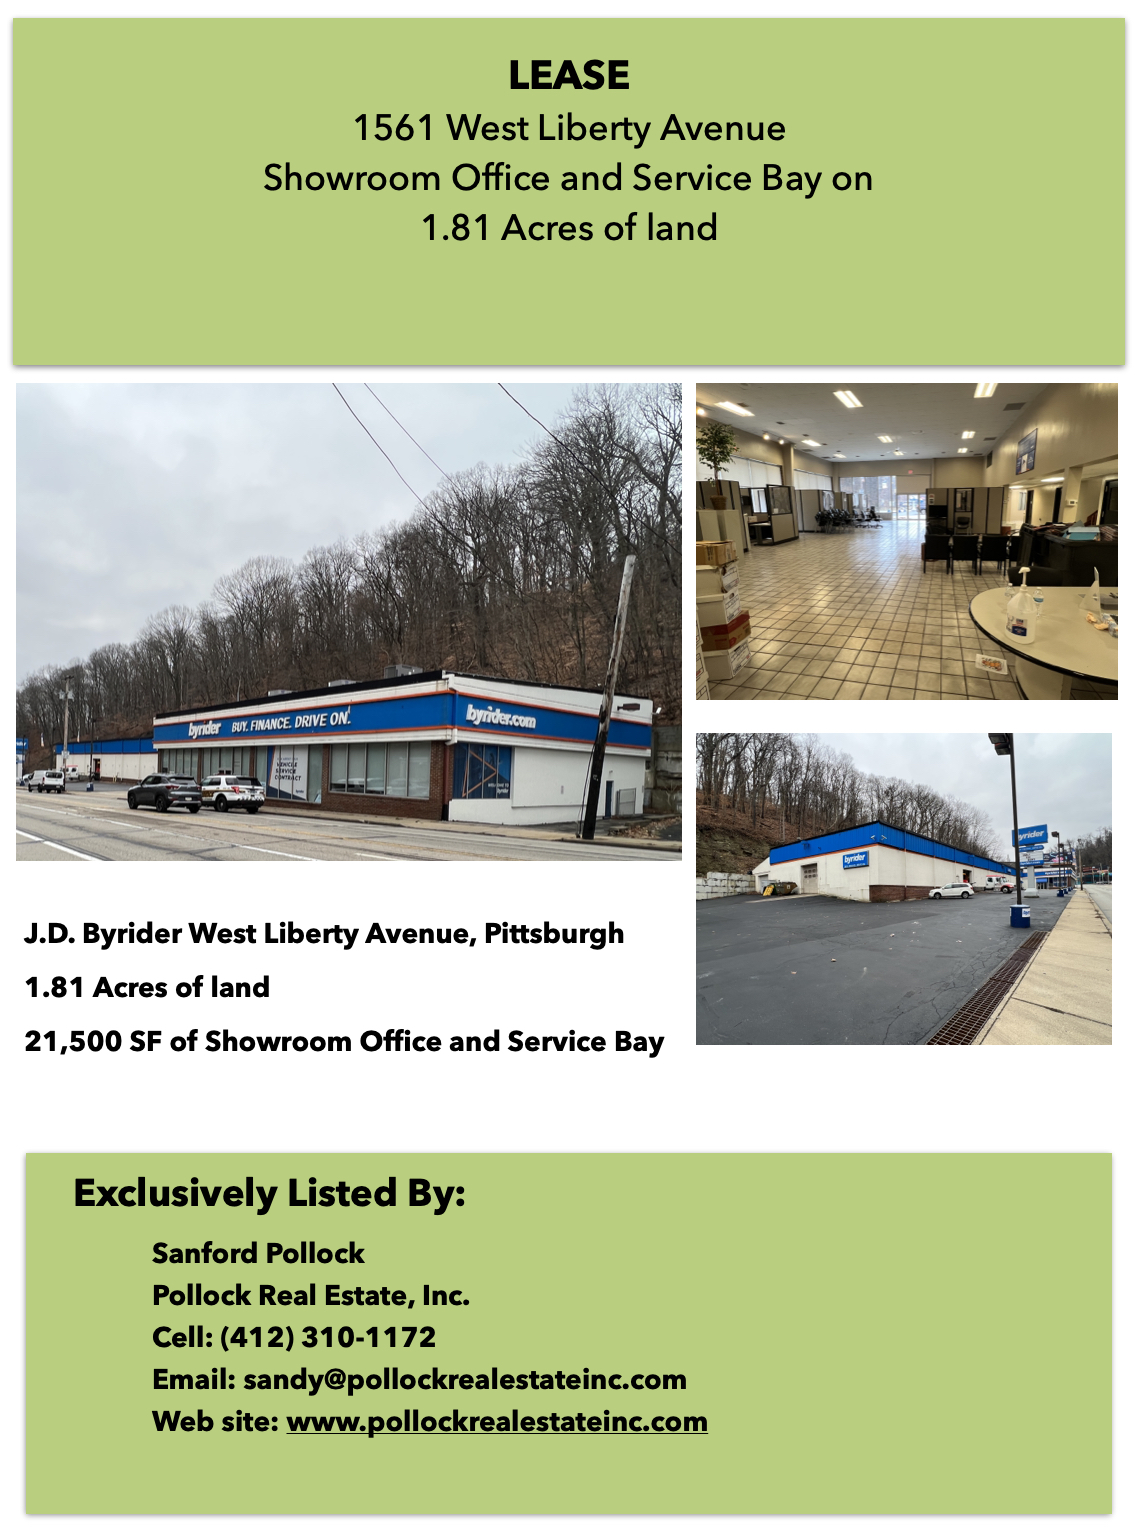 West Liberty Avenue Auto Showroom & Service Bays with parking - Just Listed for Lease West Liberty Avenue J.D. Byrider loc...